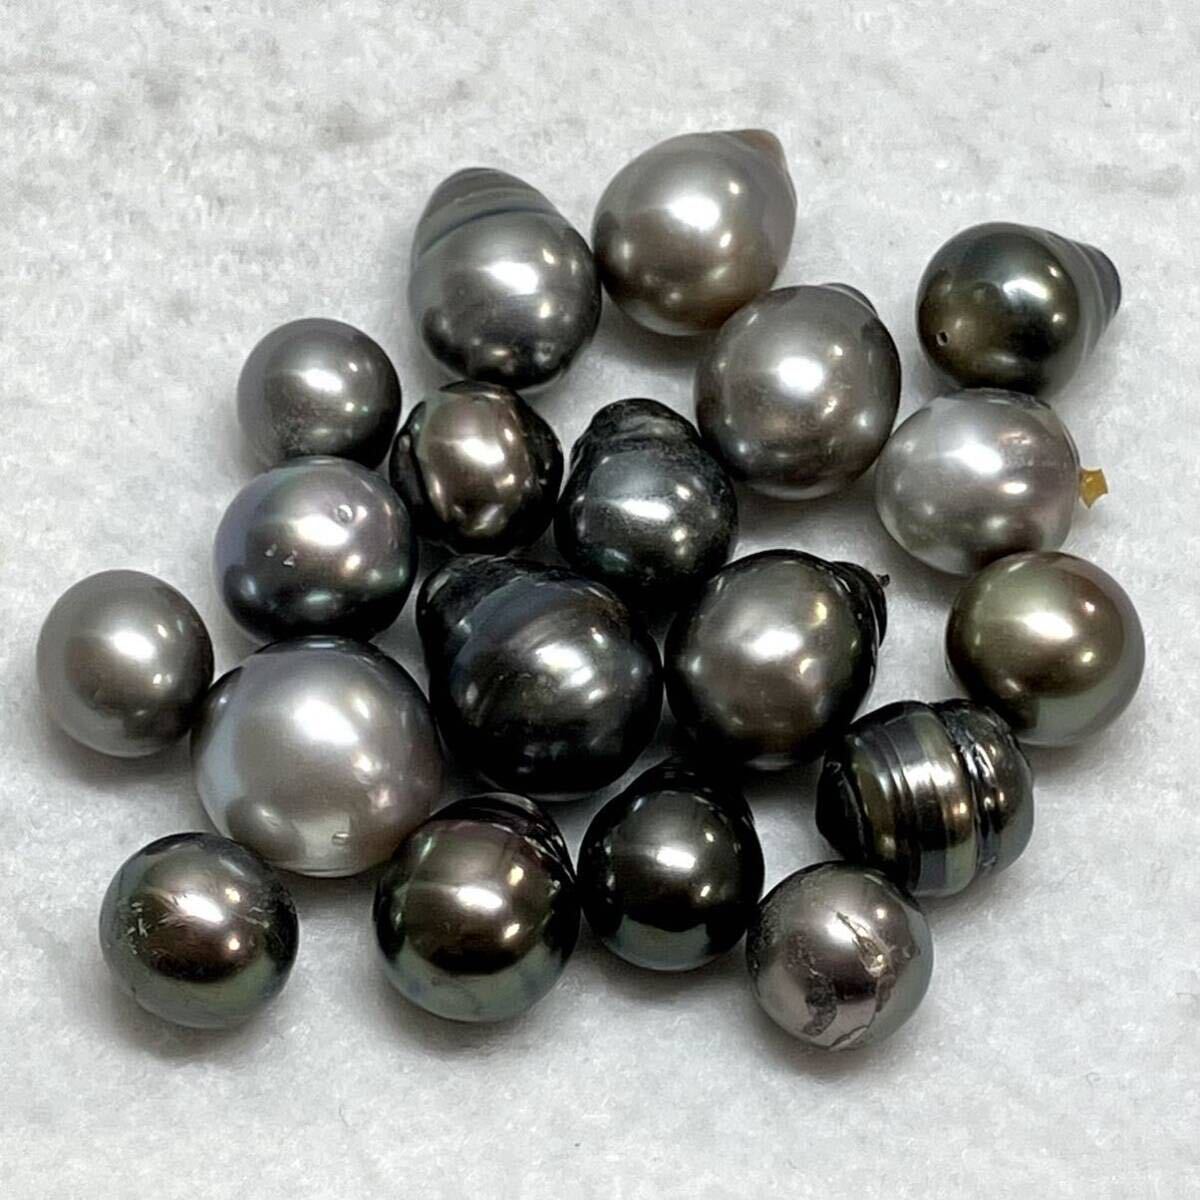 [ south . Black Butterfly pearl 19 point . summarize ]M weight approximately 50.0g approximately 250ct 10.5-17.5mm.pearl pearl loose unset jewel gem jewelry jewelry DI0 ①*